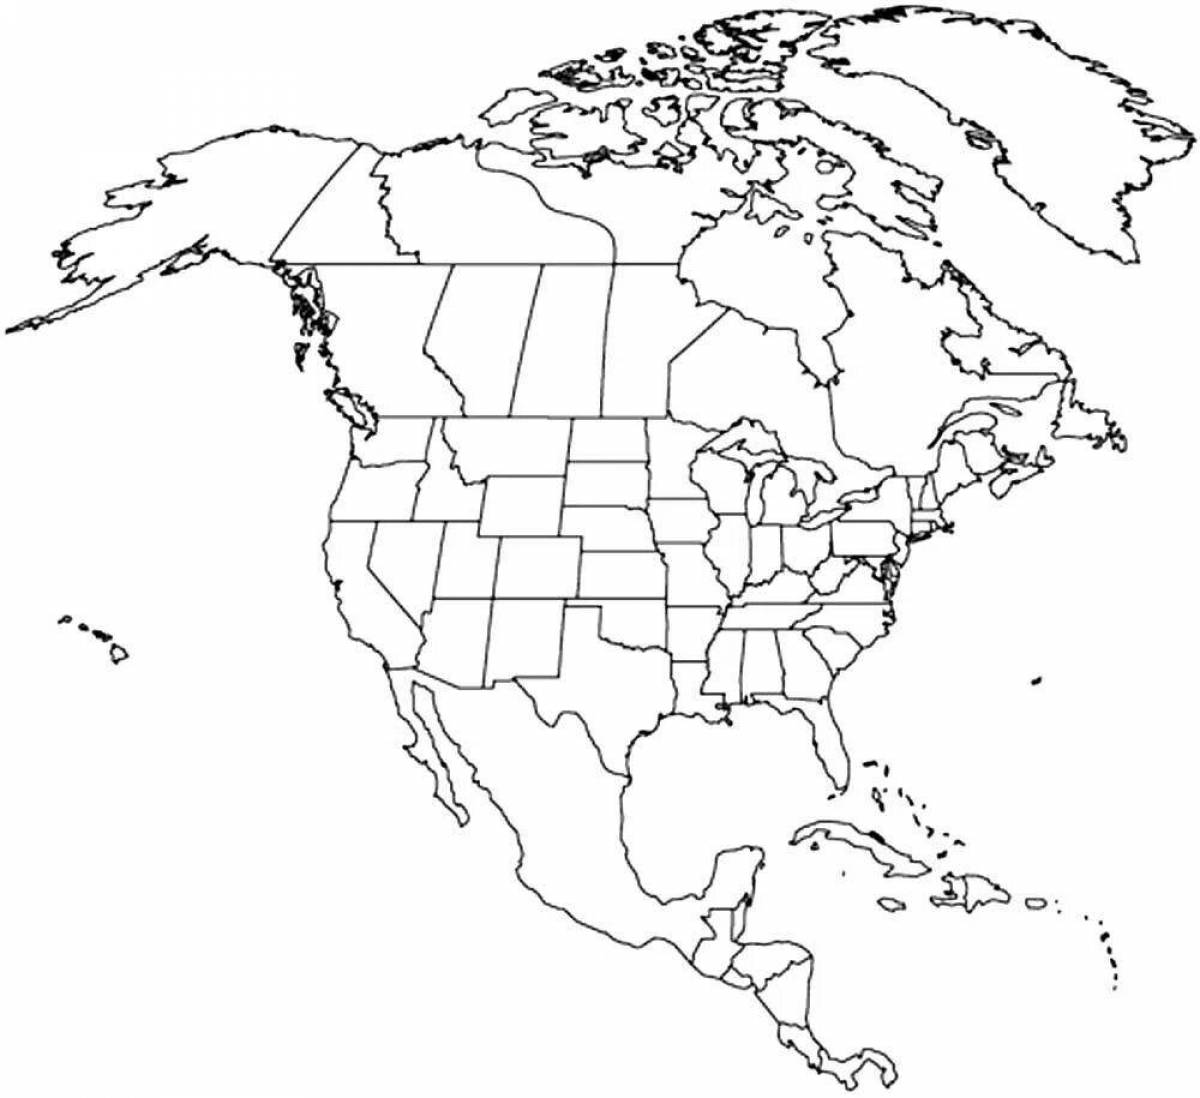 Attractive usa map coloring page